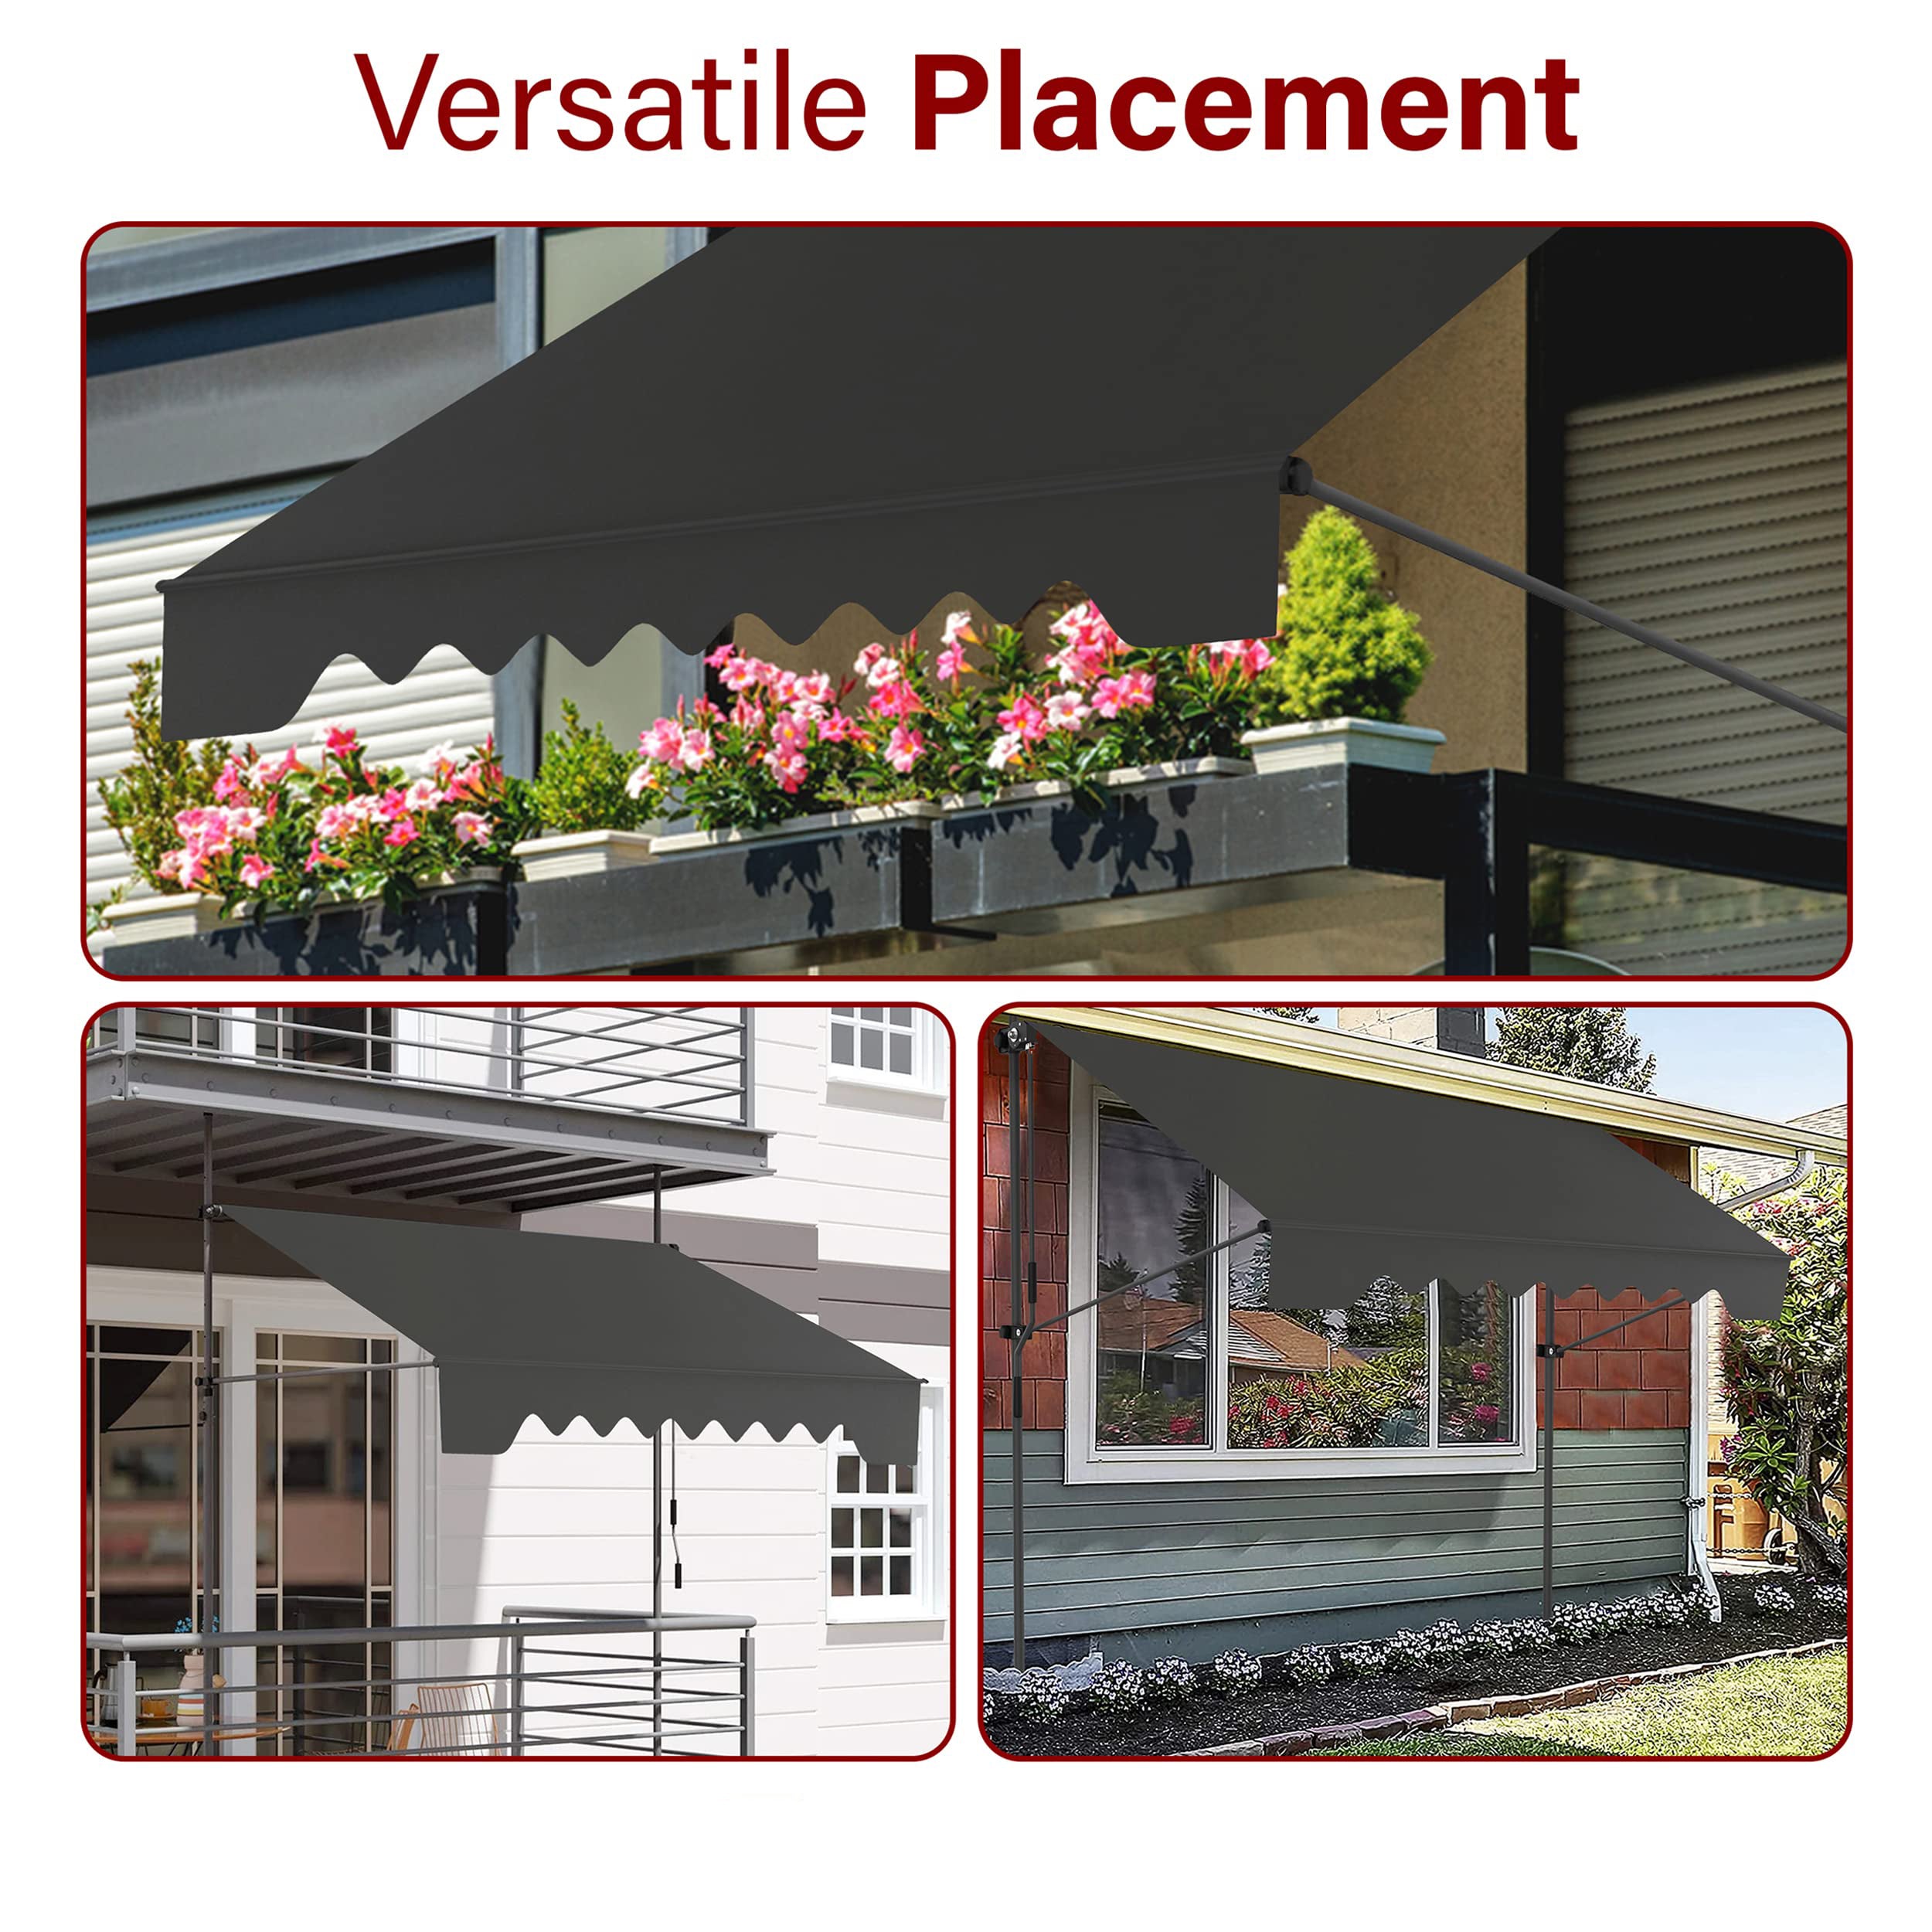 No Drill Adjustable Patio Retractable Awning UV Resistant Waterproof Canopy with Hand Crank for any Window or Door KGORGE Store